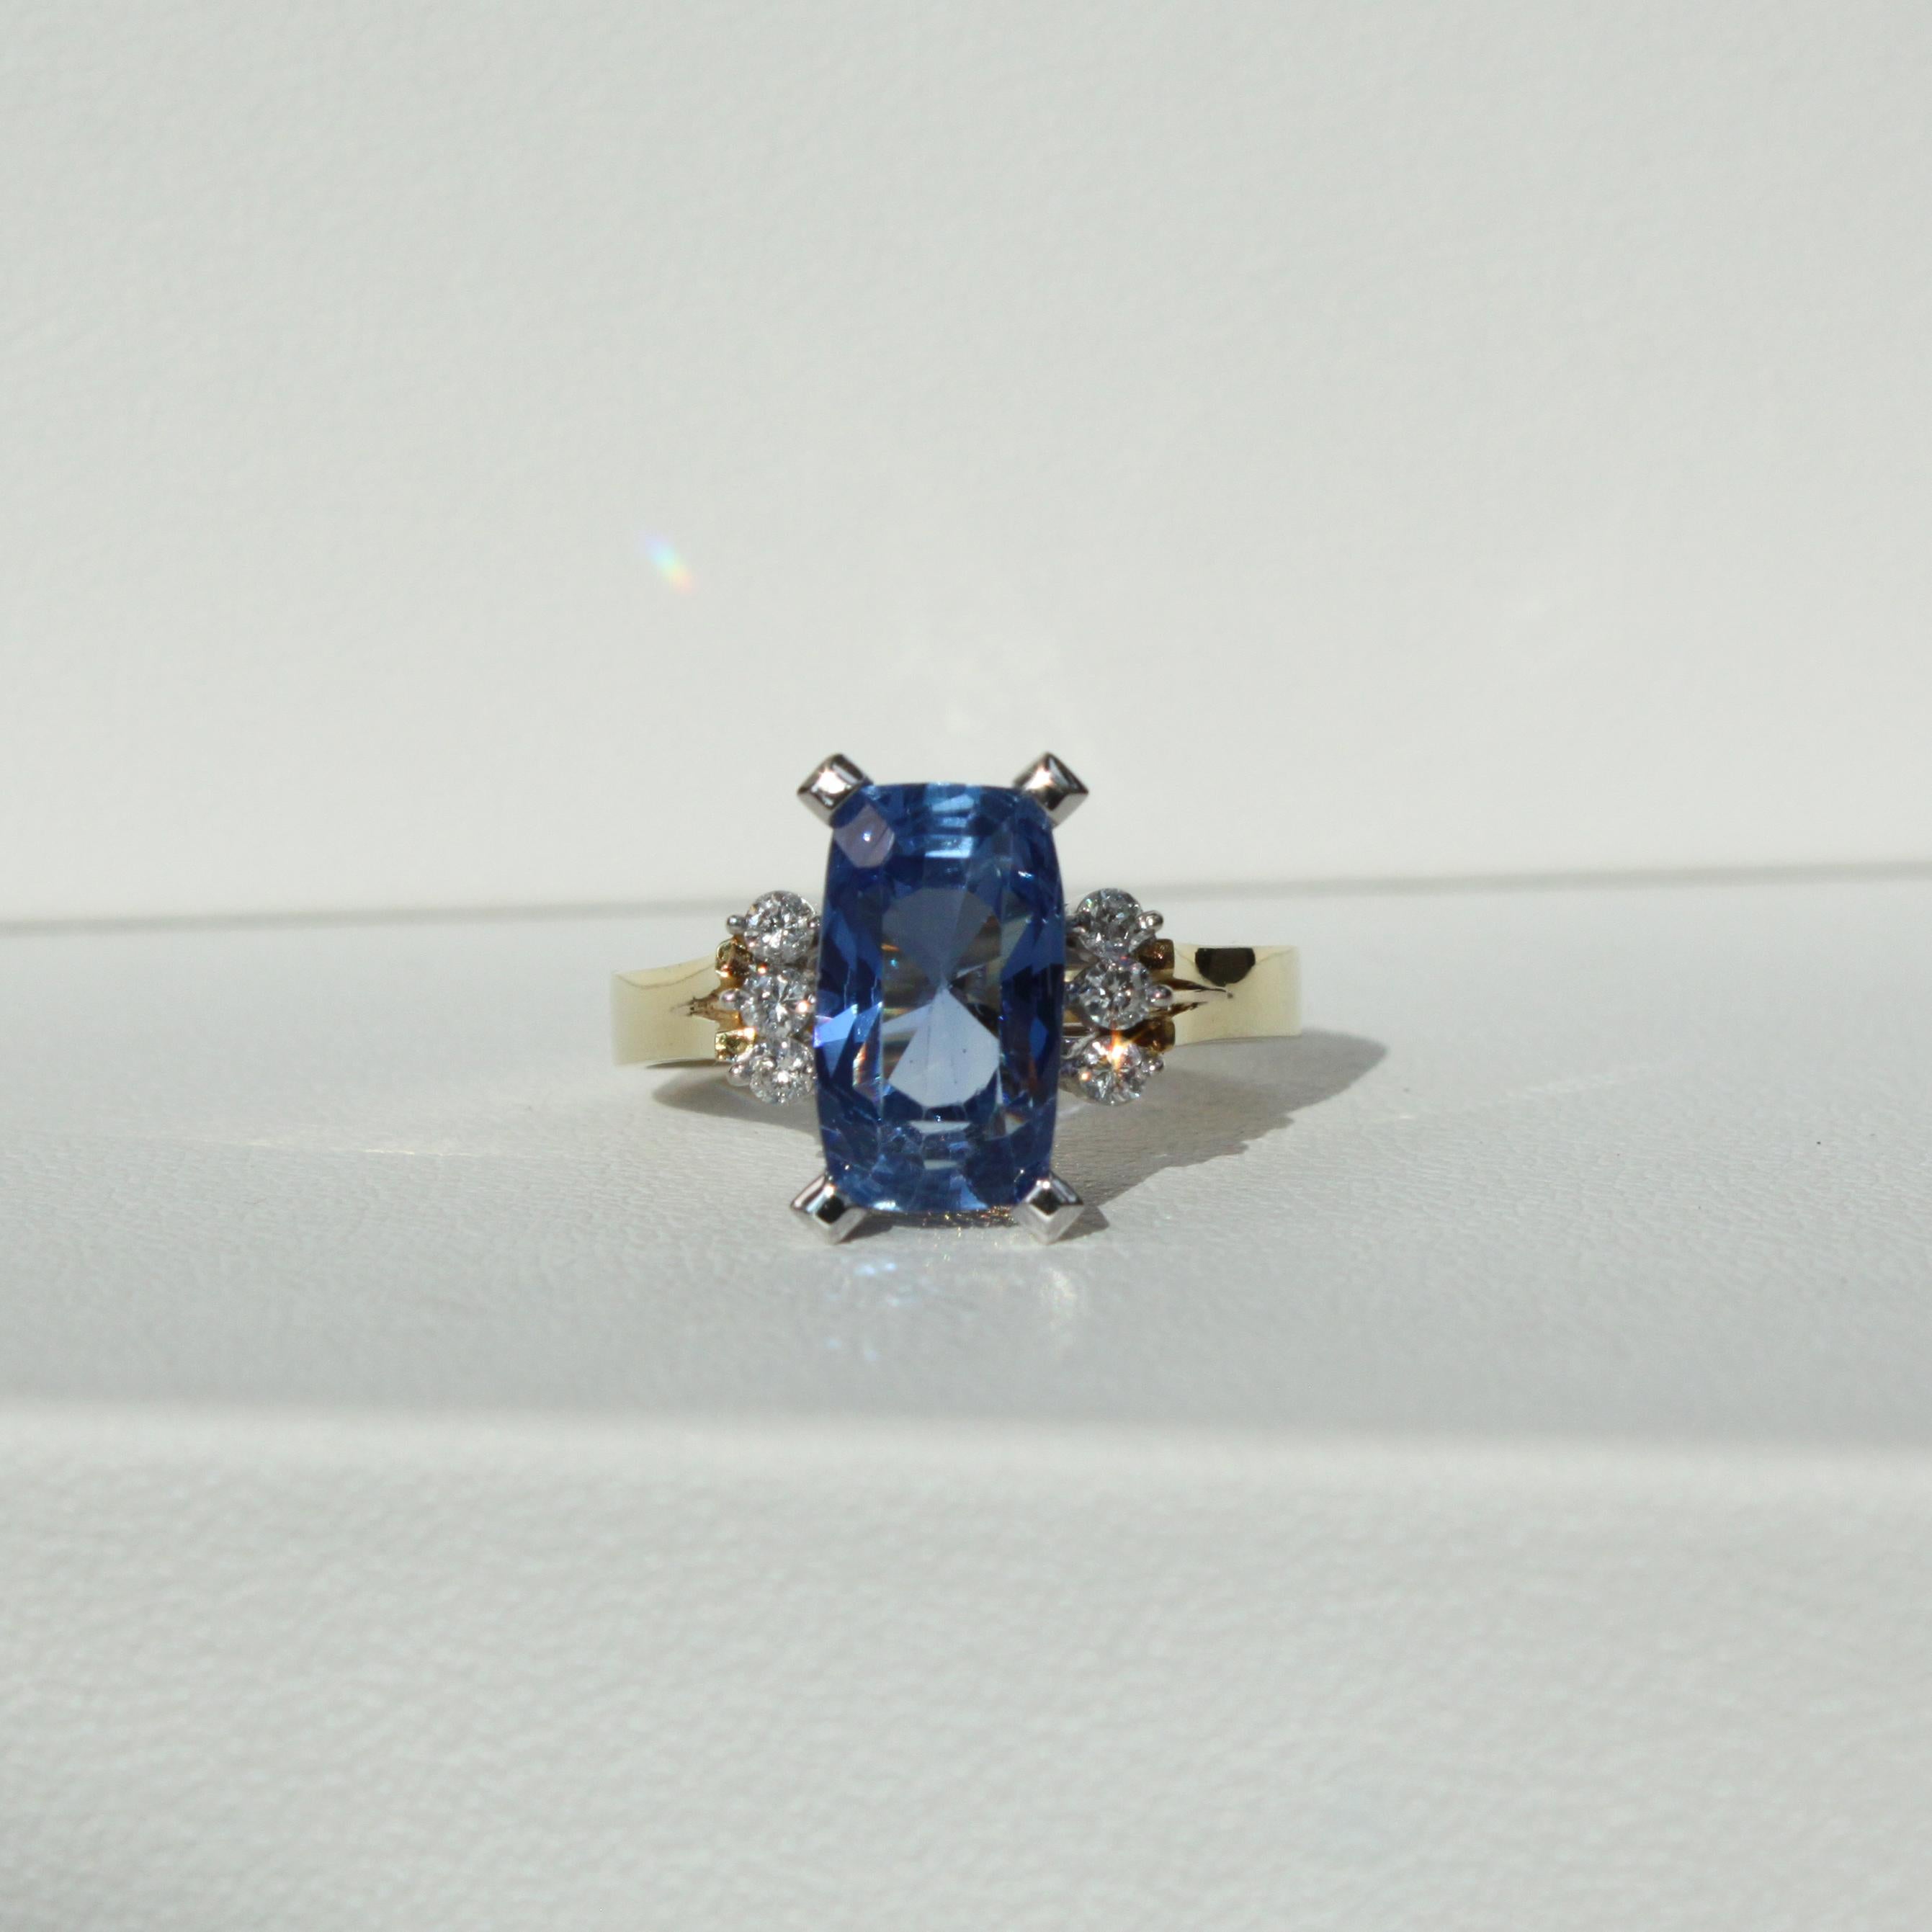 Metal – 18K Gold
6.98ct Unheated Ceylon Blue Sapphire
0.18ct Natural D-G colour diamonds
Total Ring Weight 6.34 g
Ring Size 58 EU / 8.5 US / 18.5mm

Indulge in the allure of a bygone era with our Vintage Cushion Cut Ceylon Blue Sapphire Ring in 18K